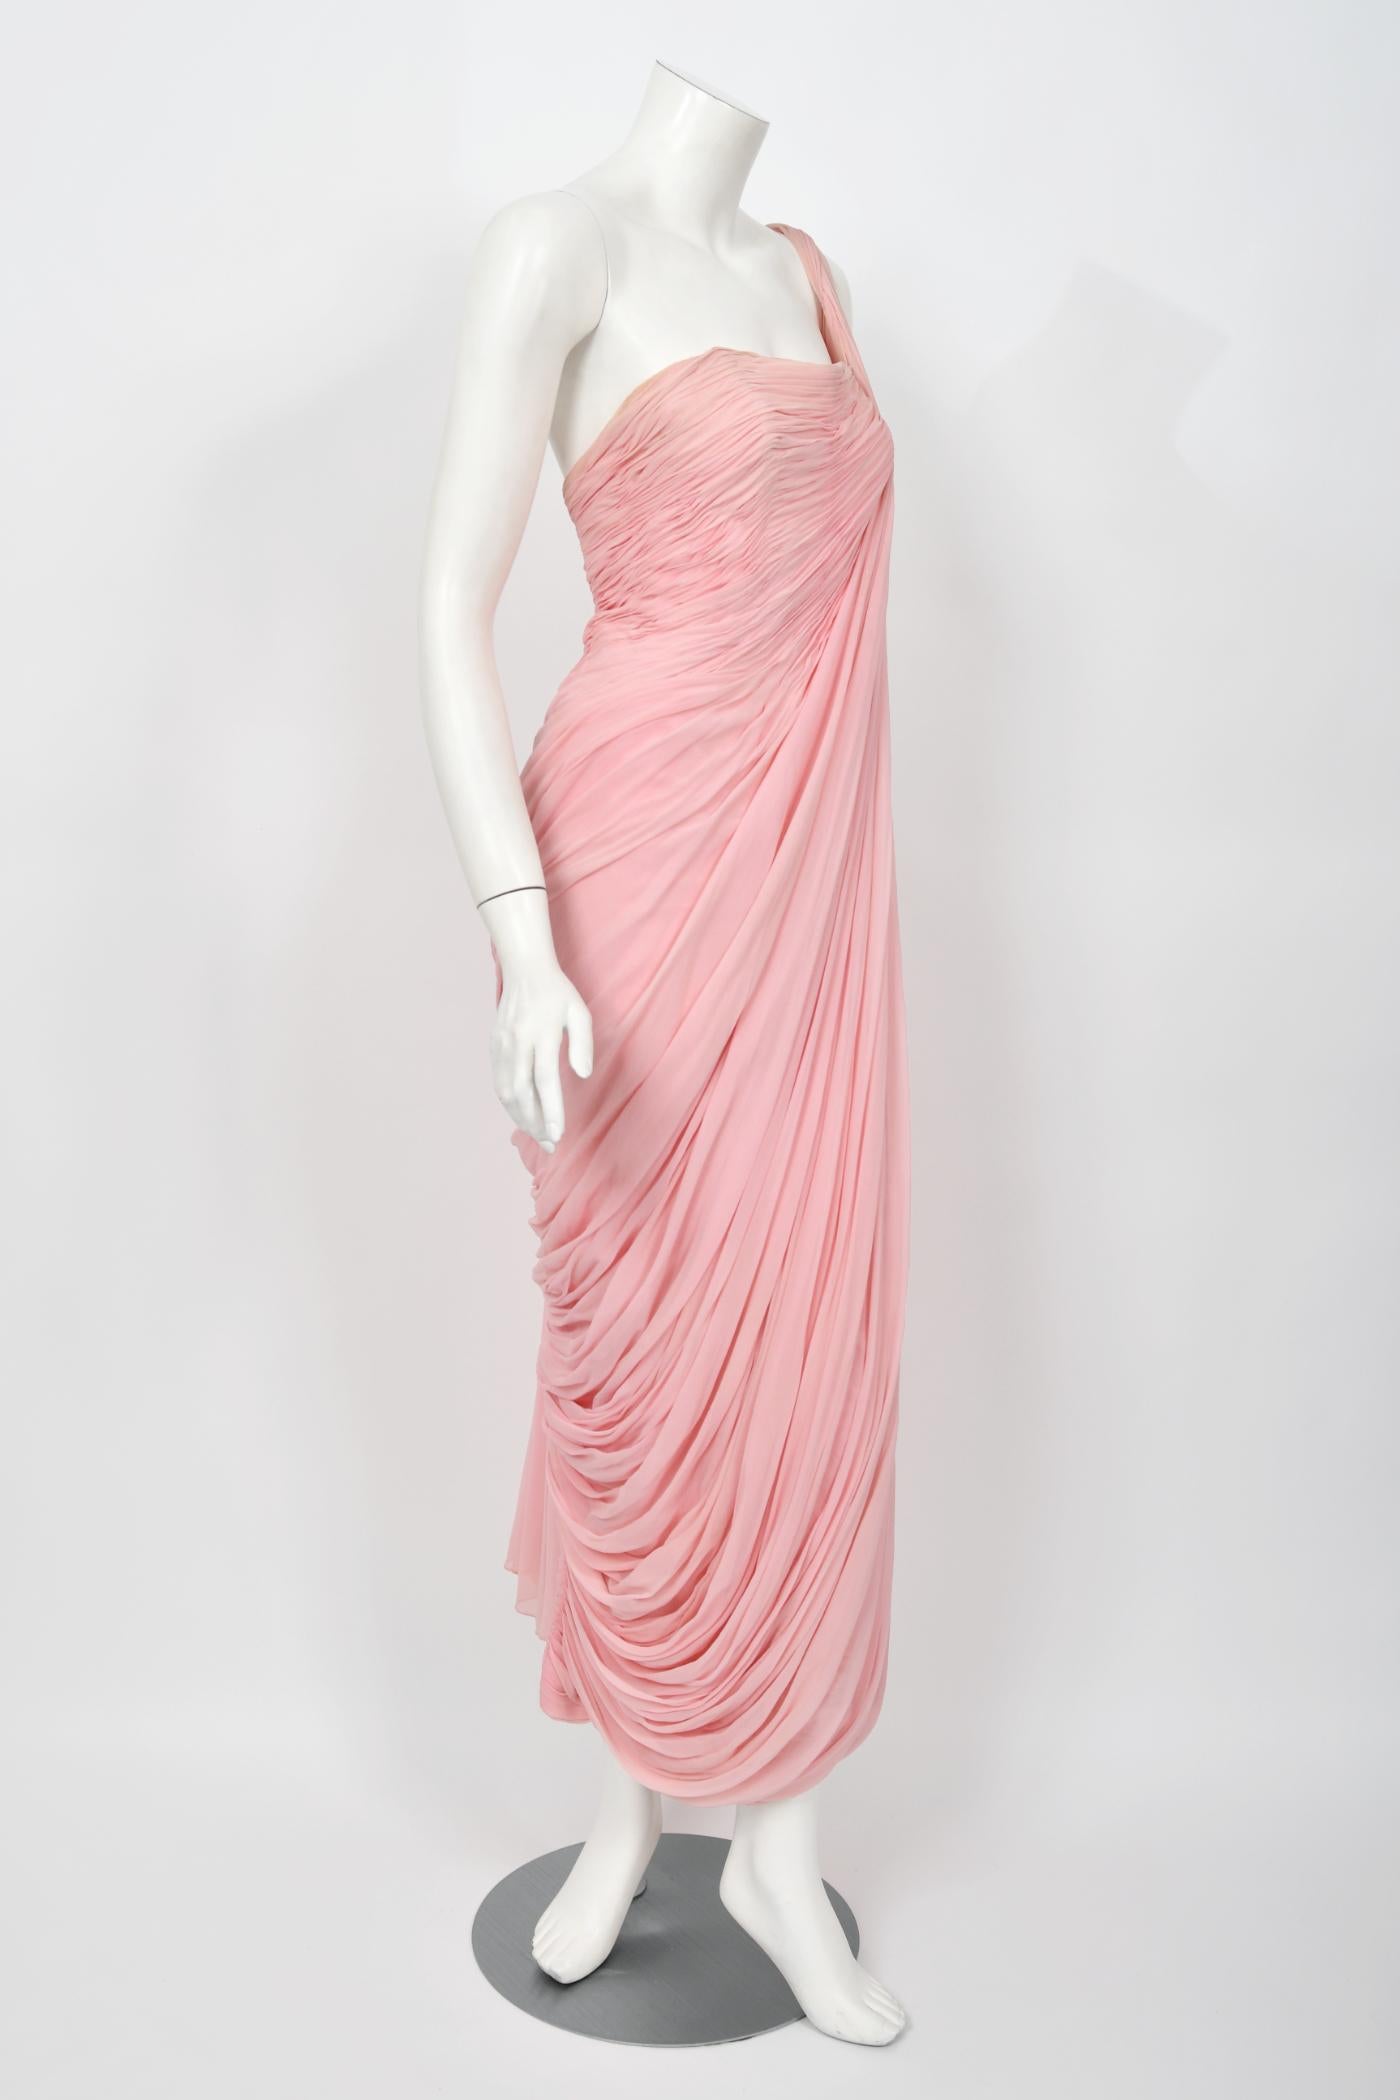 1958 Jean Dessès Haute Couture Documented Pink Ruched Silk Chiffon Goddess Gown For Sale 8